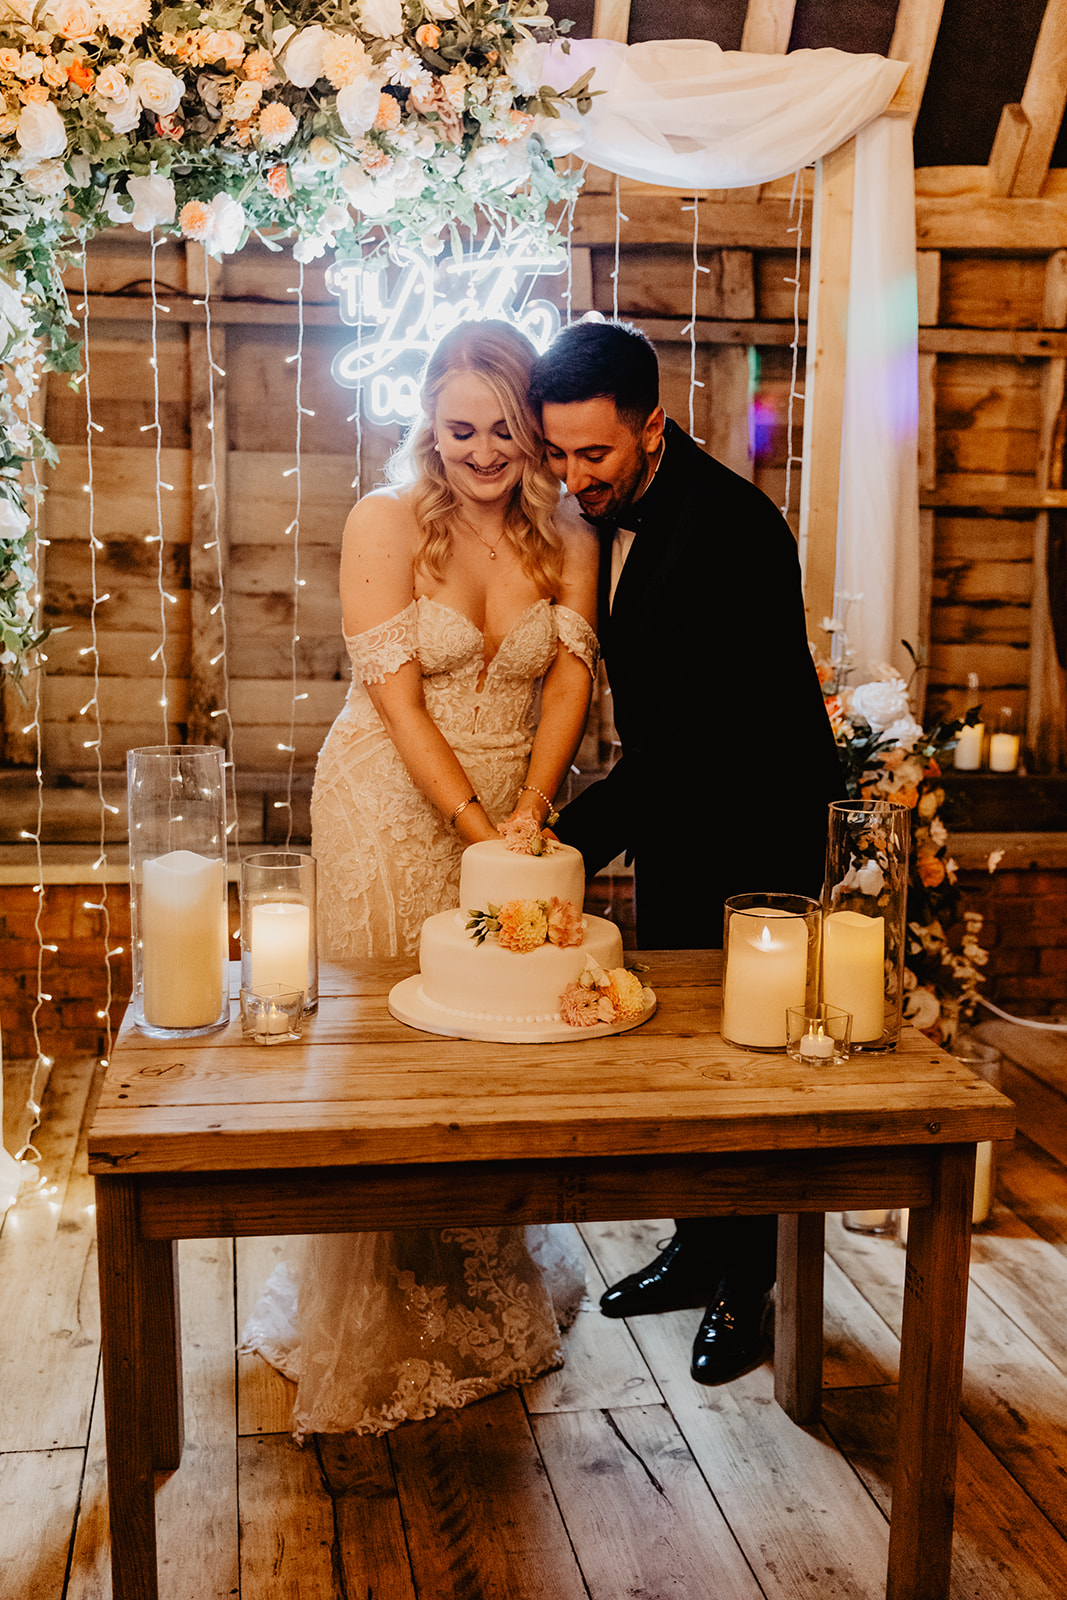 Bride and groom cut the cake at a Southlands barn wedding, Sussex. Photo by OliveJoy Photography.